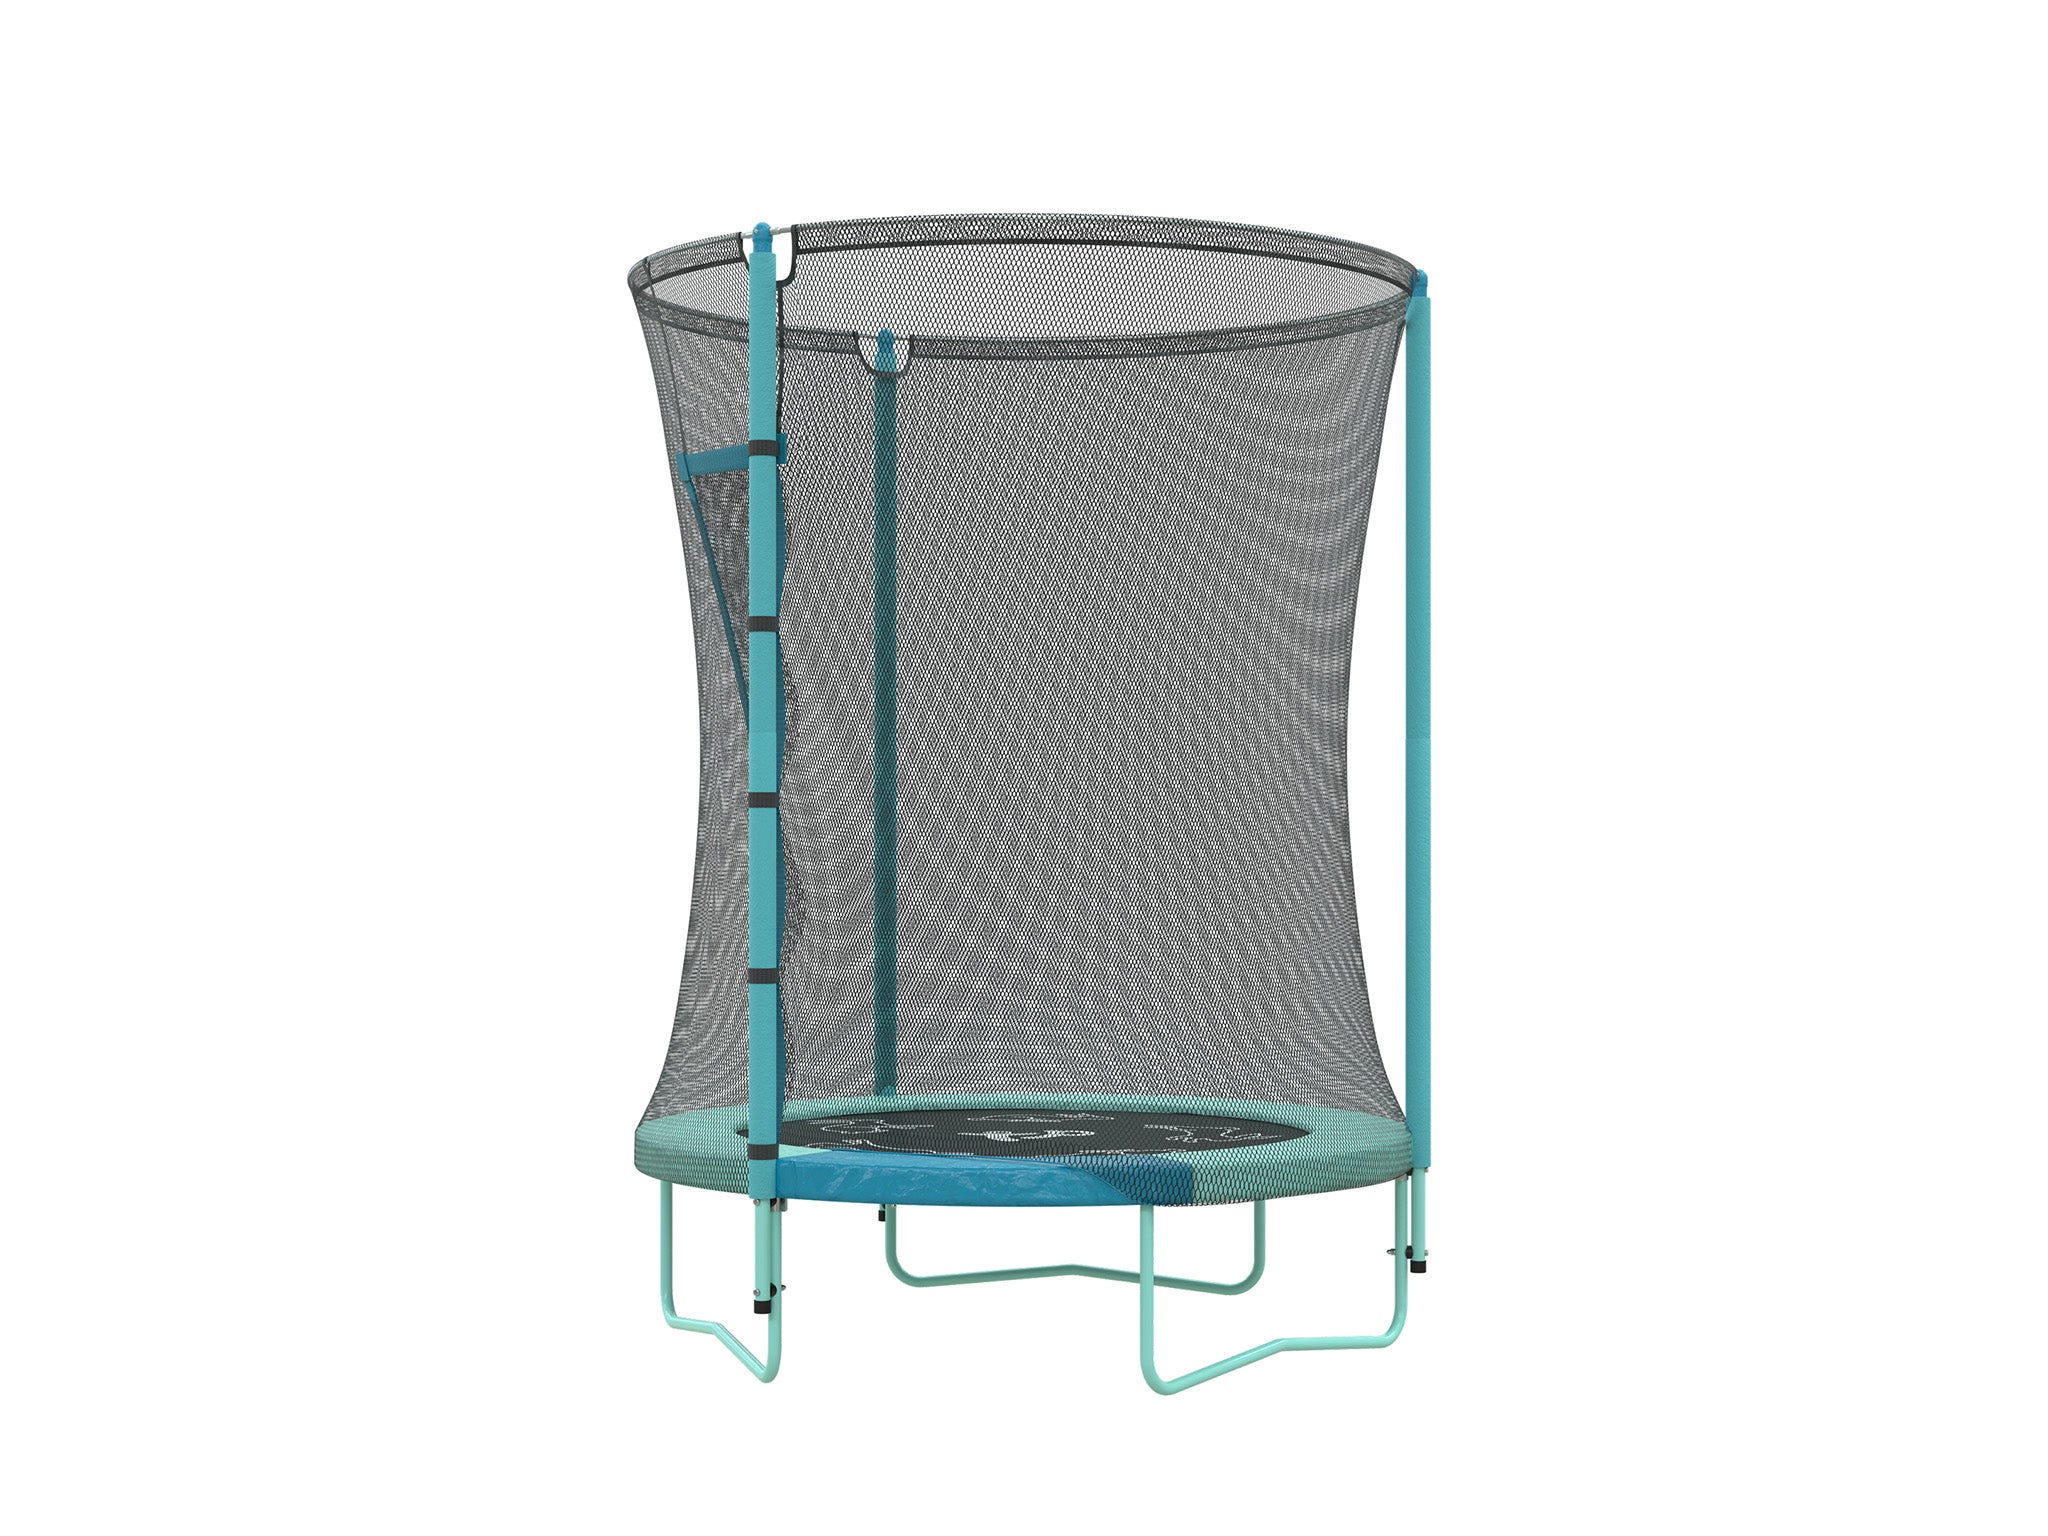 best trampolines to buy for toddlers adults tricks garden uk